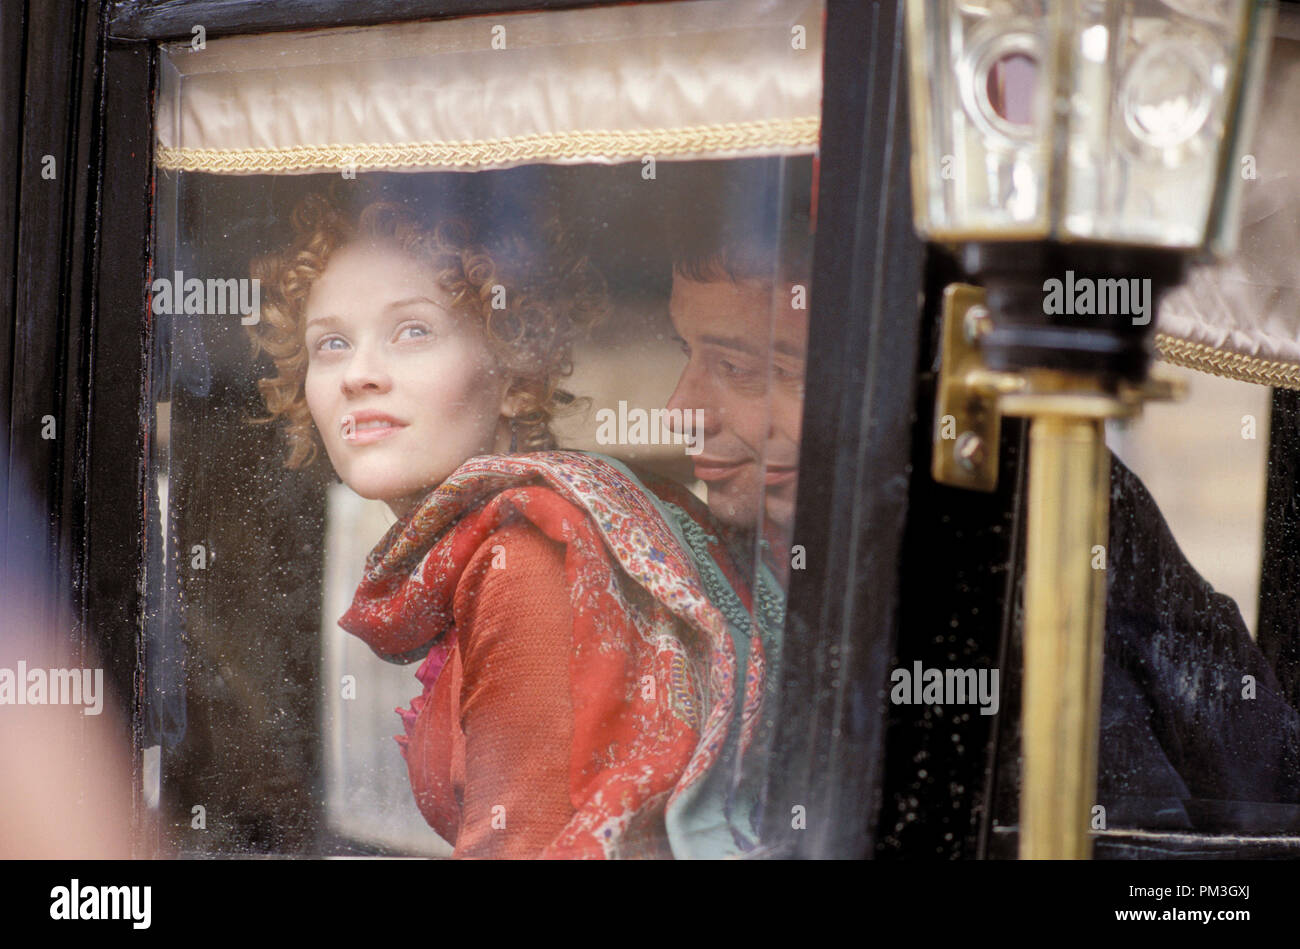 Film Still from 'Vanity Fair' Reese Witherspoon, James Purefoy © 2004 Focus Features  File Reference # 30735698THA  For Editorial Use Only -  All Rights Reserved Stock Photo